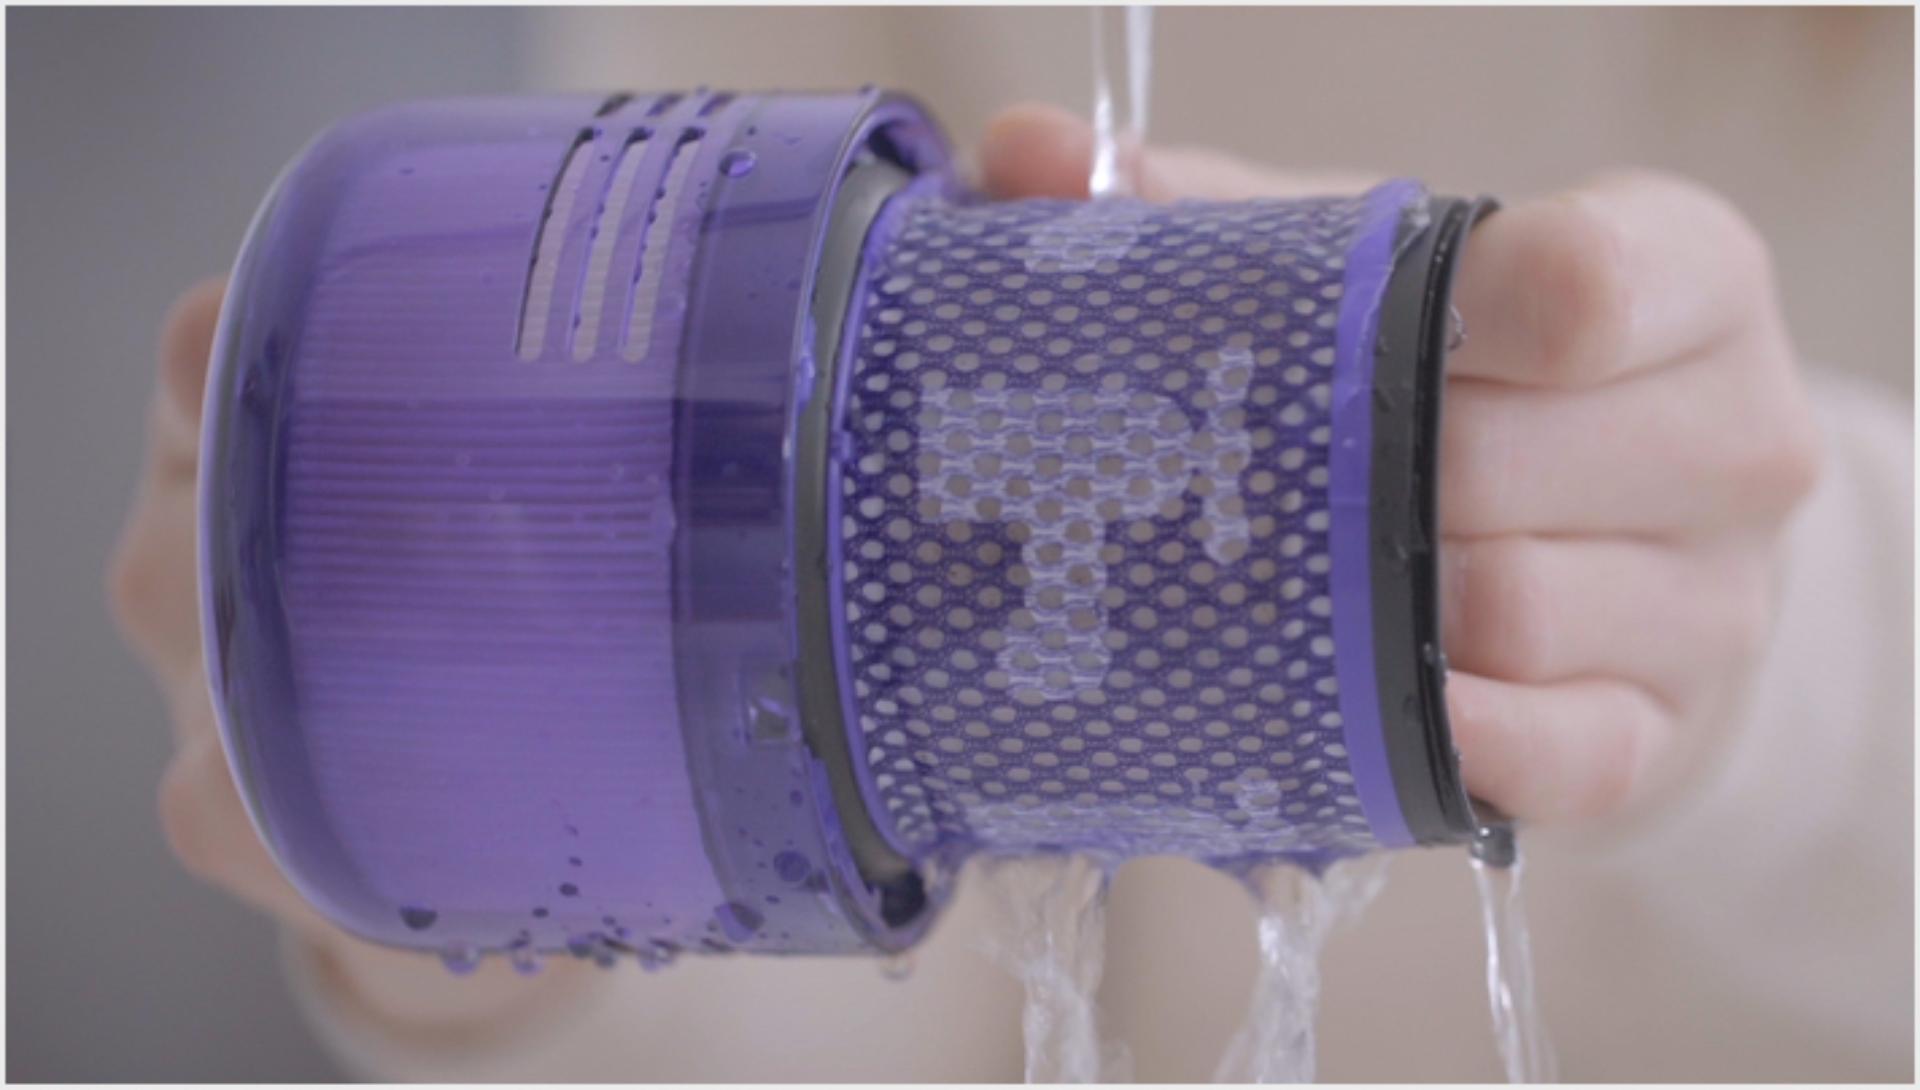 Image from video about washing the filter